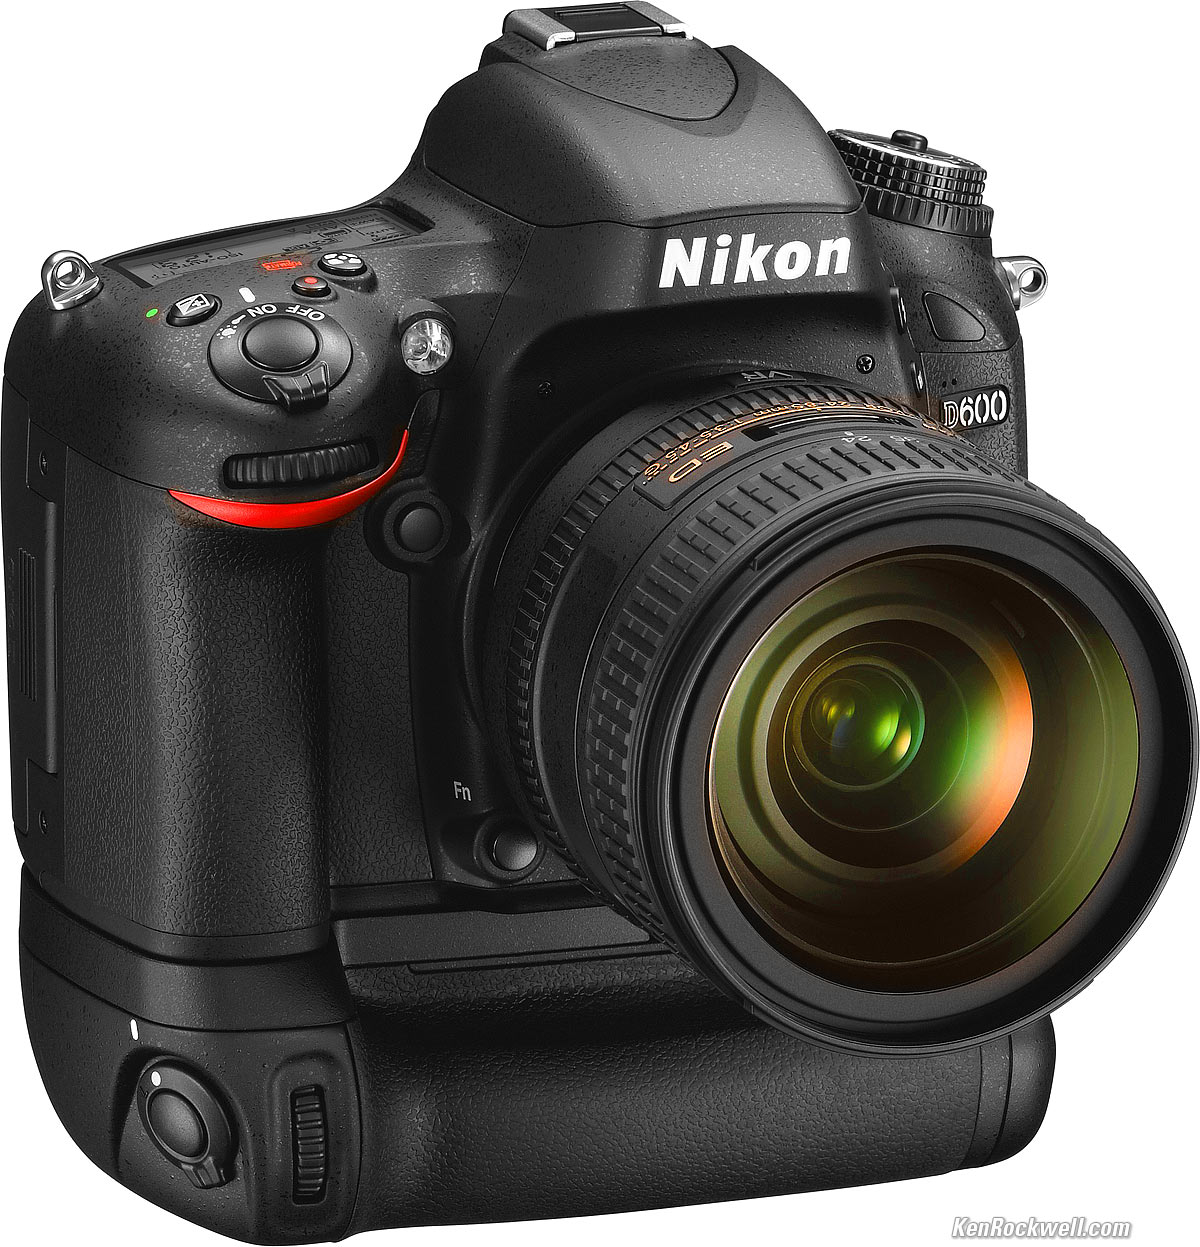 Nikon D600 with 24-85 VR and MB-D14 Grip . enlarge .